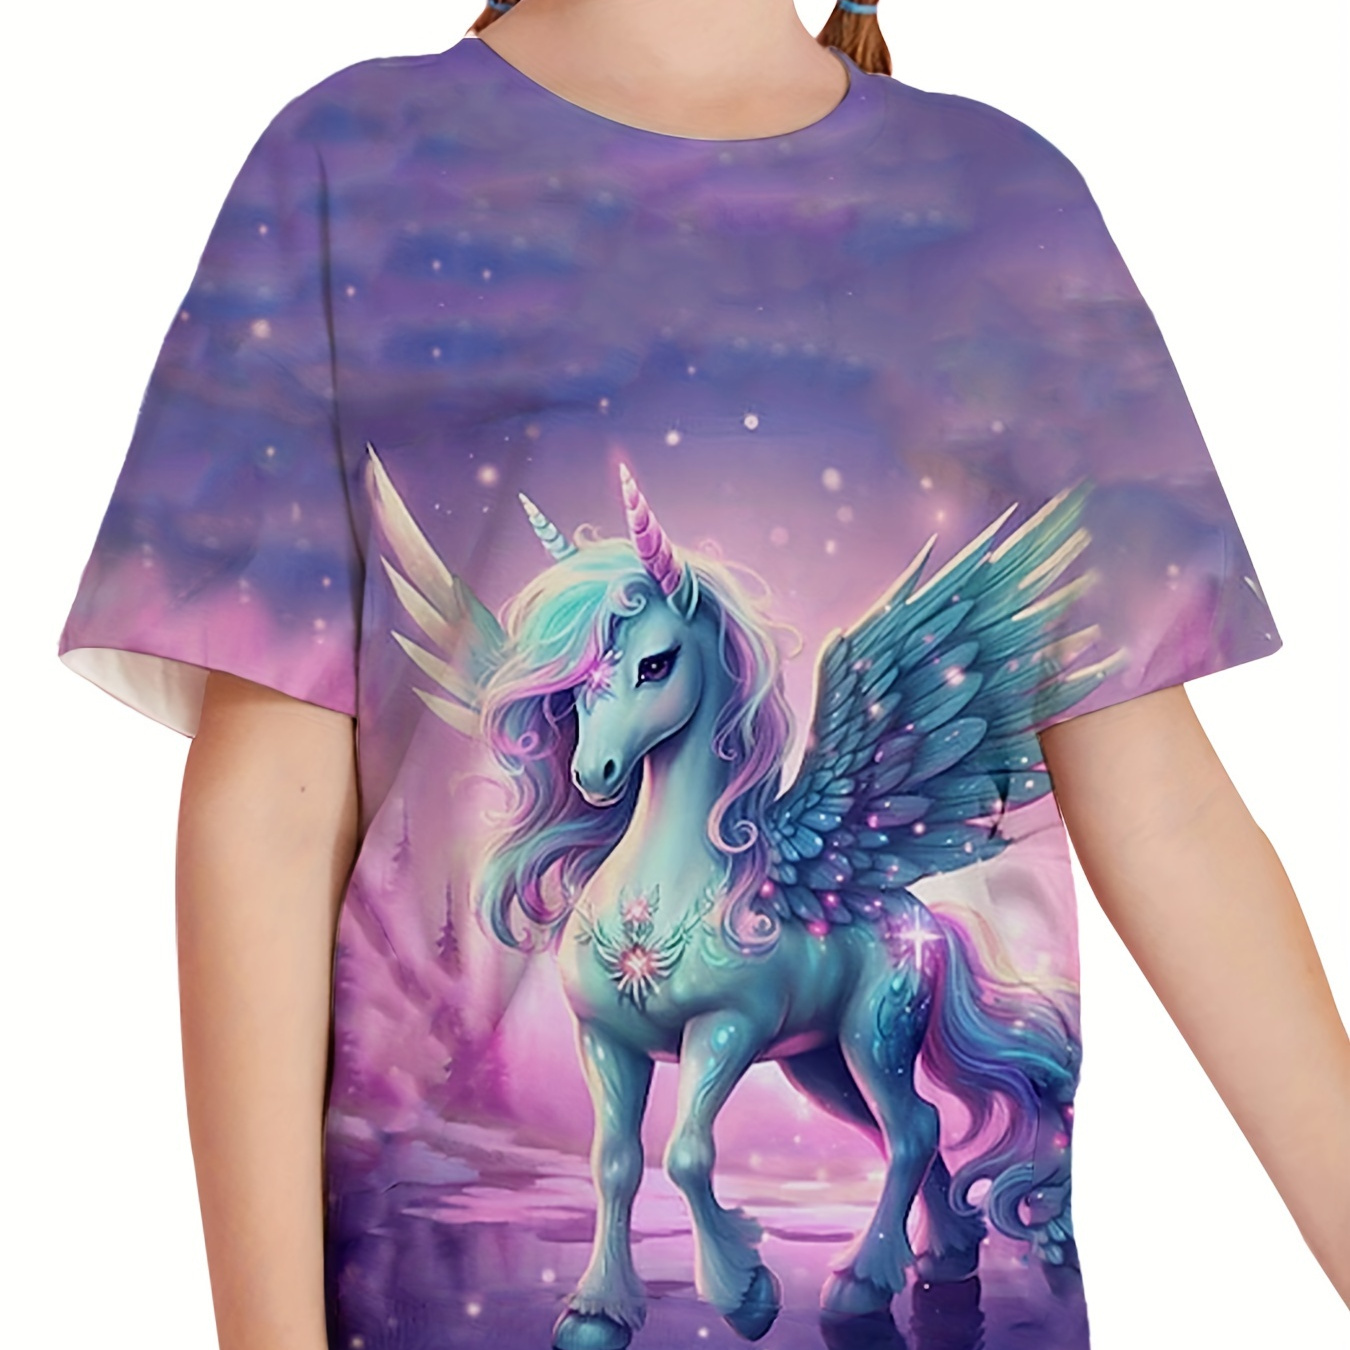 

Girls Starry Sky Graphic Unicorn Print Short Sleeve T-shirt Summer Clothes Party